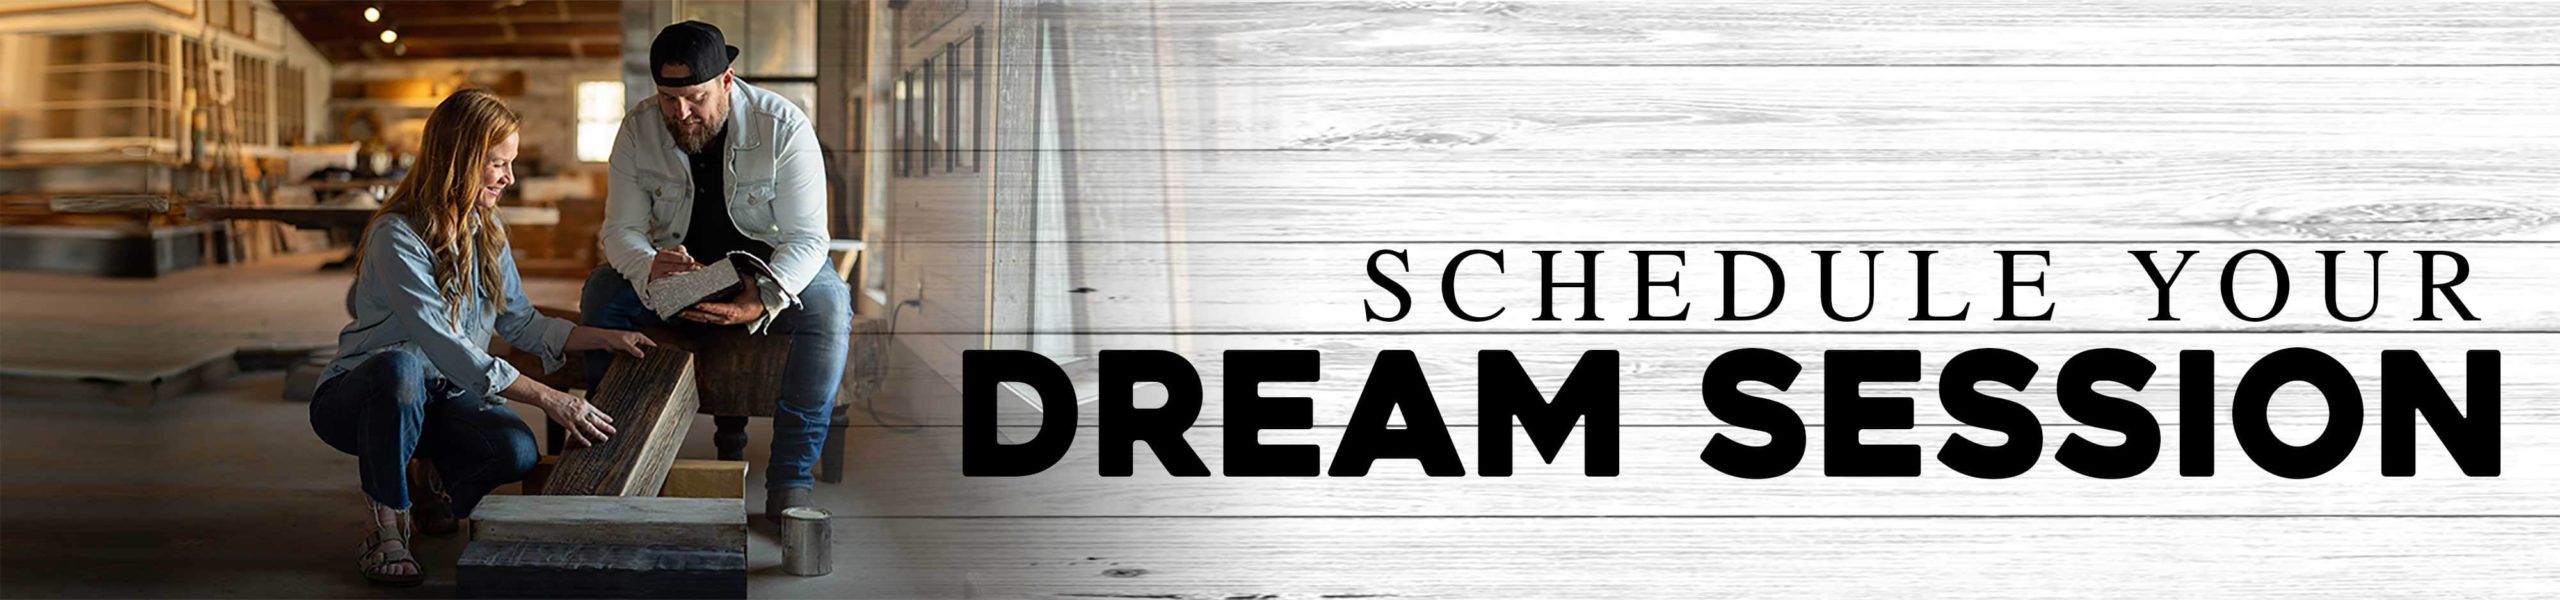 Schedule Your Dream Session